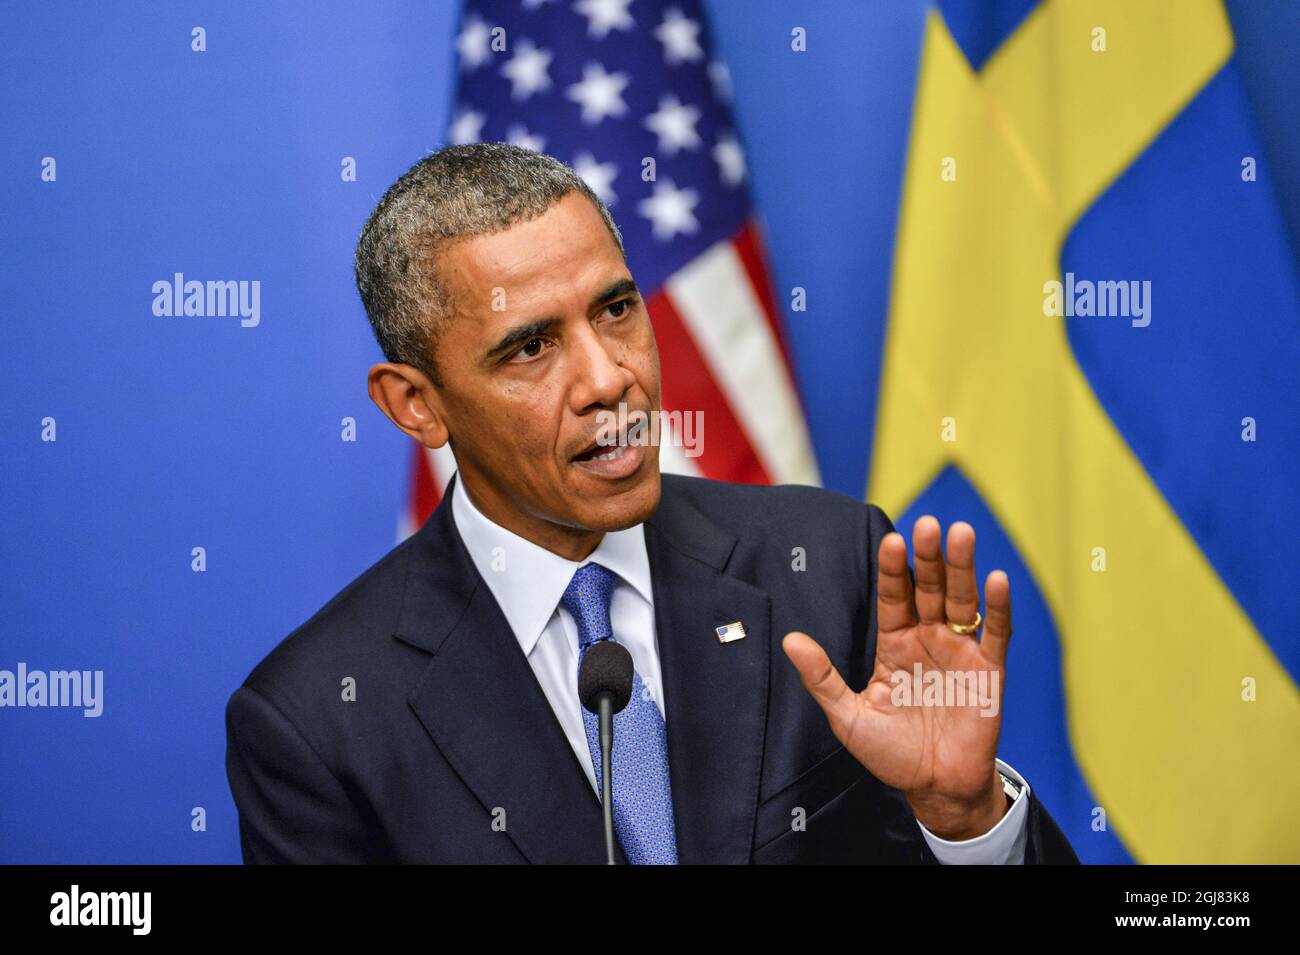 STOCKHOLM 20130904 US President Barack Obama during the press conference at the Government offices in Stockholm, Sweden, September 4, 2013. President Obama is in Sweden for bilateral talks prior to a G20 summit in Russia. Foto Jonas Ekstromer / SCANPIX kod 10030  Stock Photo